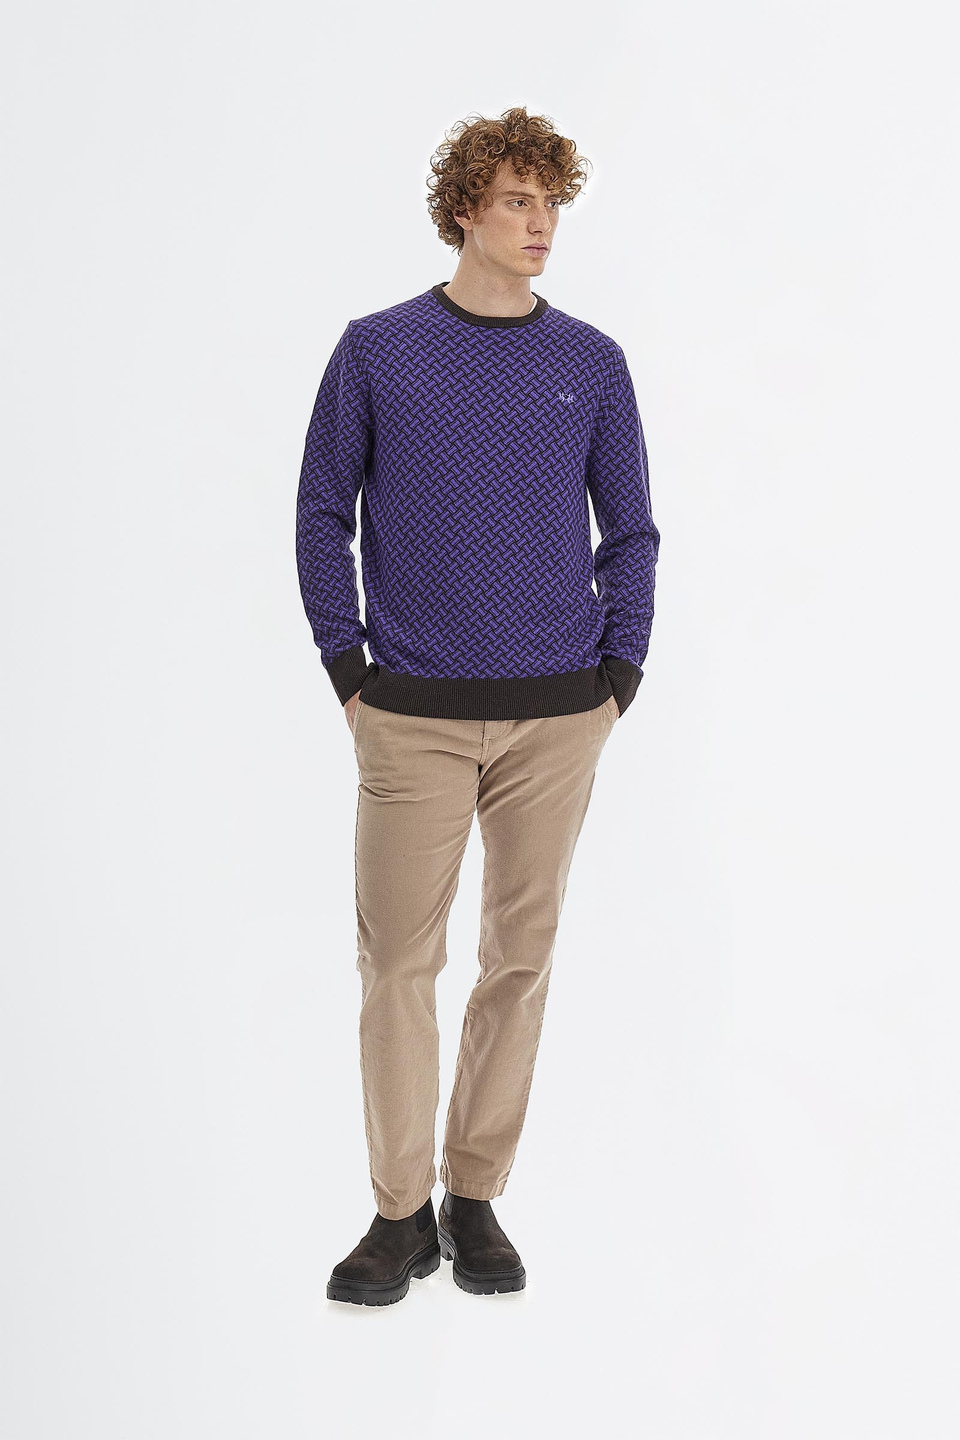 Men’s crew neck sweater Argentina with long sleeves in regular fit cashmere merino wool blend | La Martina - Official Online Shop